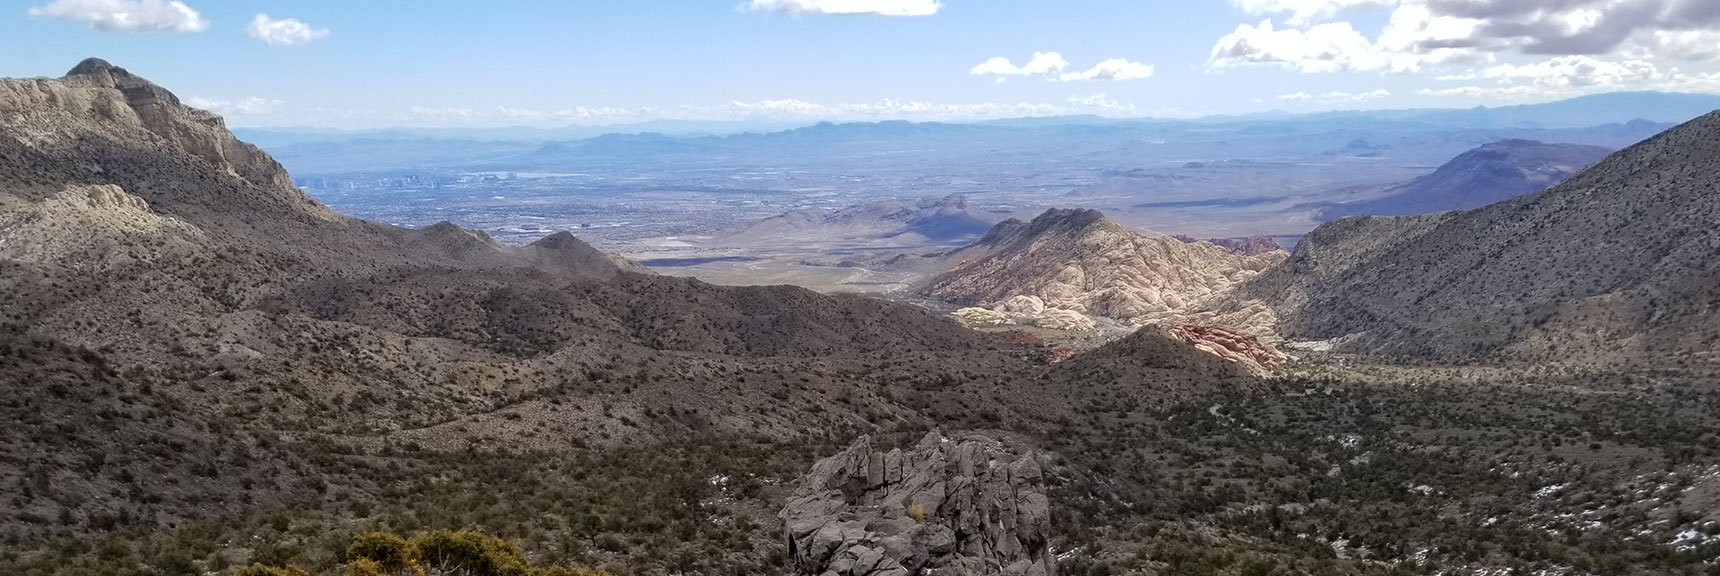 View of Calico Basin and Las Vegas from the base of La Madre Mountain